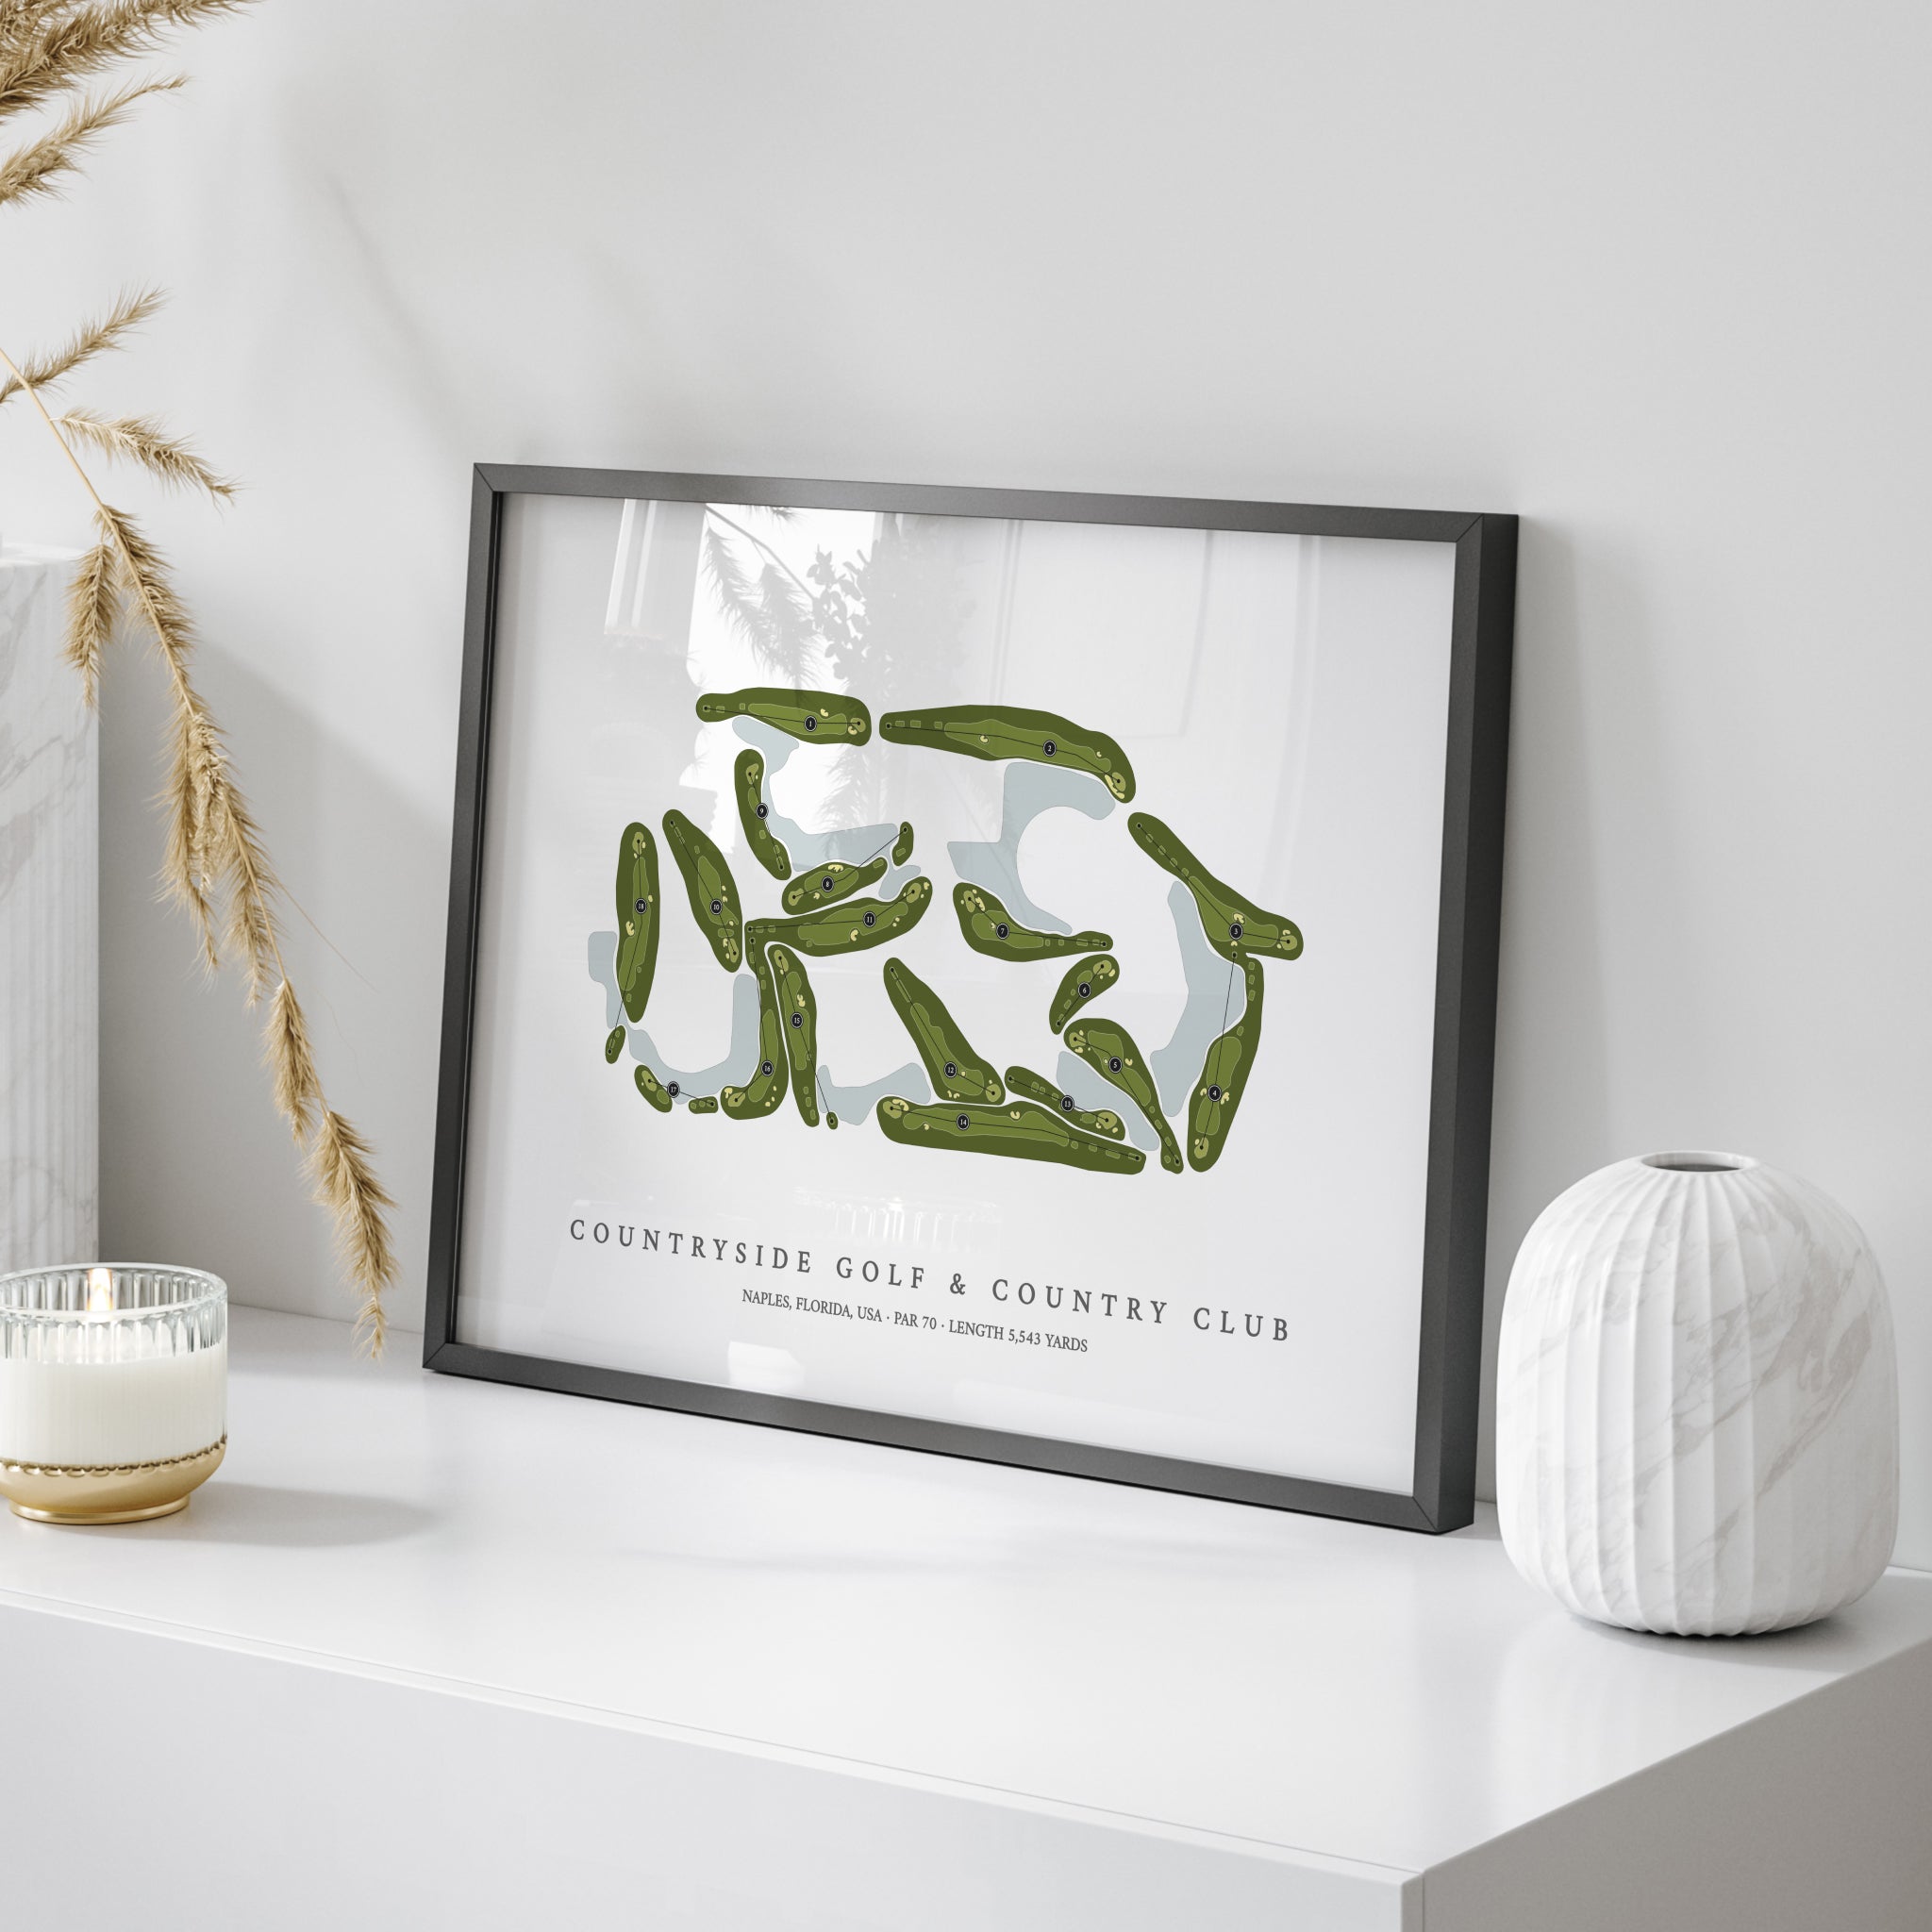 Countryside Golf & Country Club | Golf Course Print | On Table 